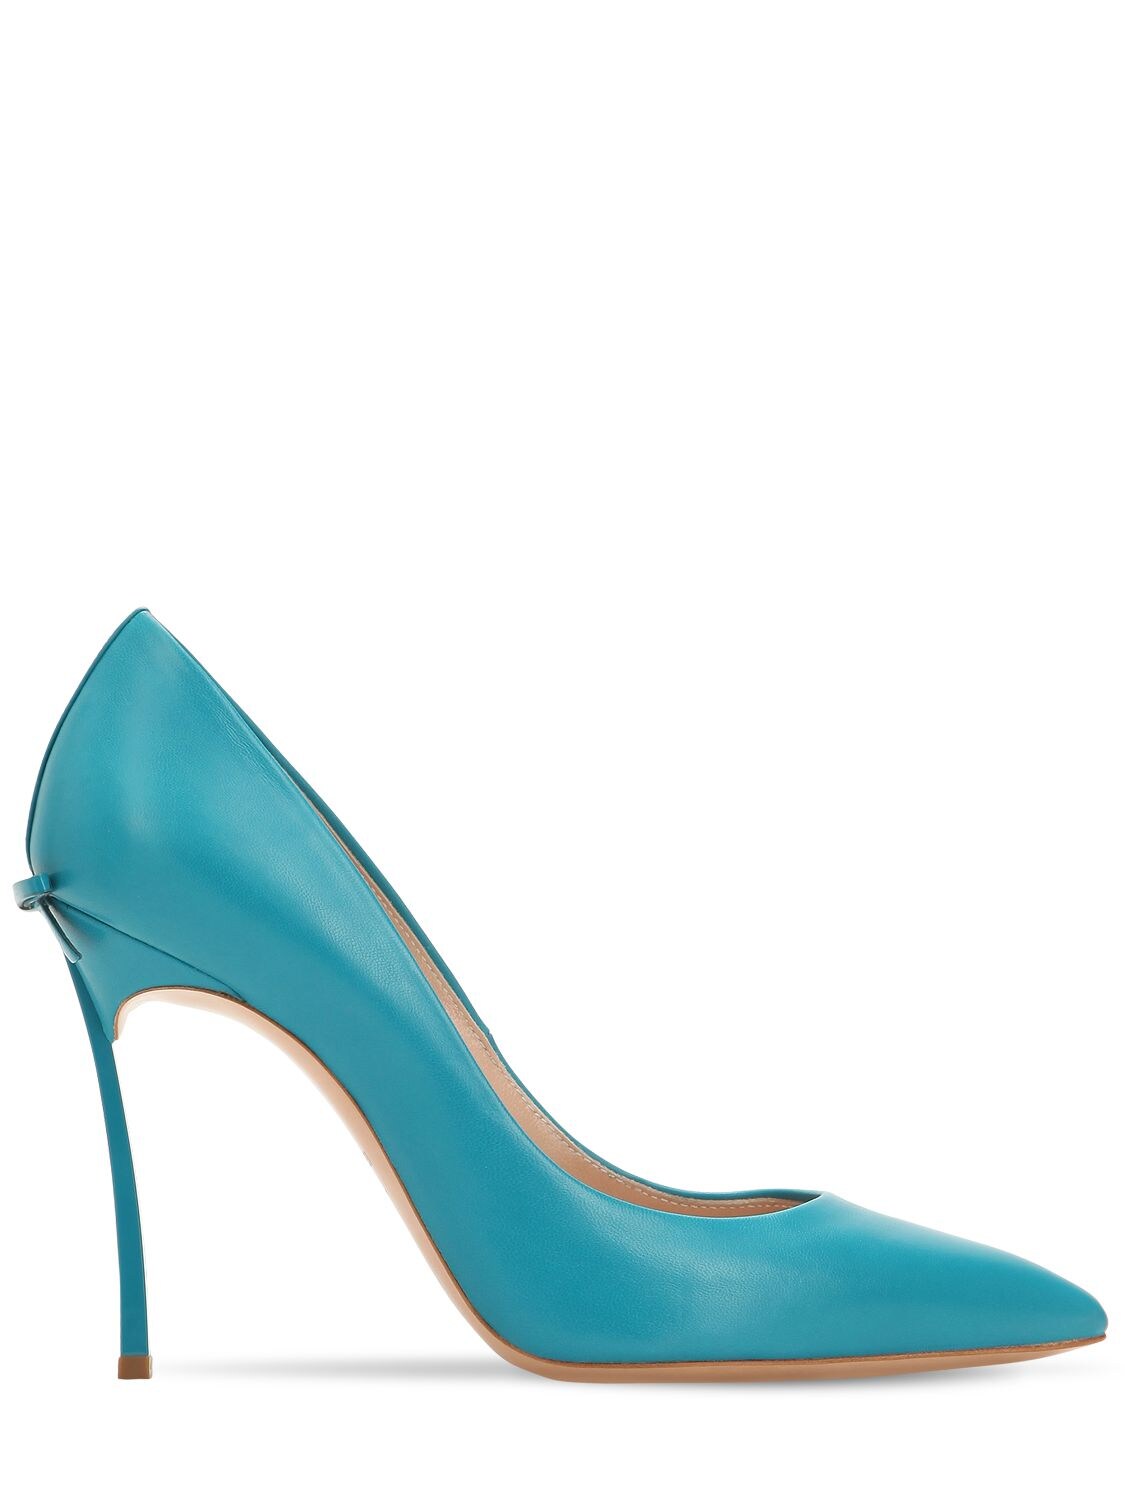 Casadei 100mm Blade Leather Pumps In Petrol